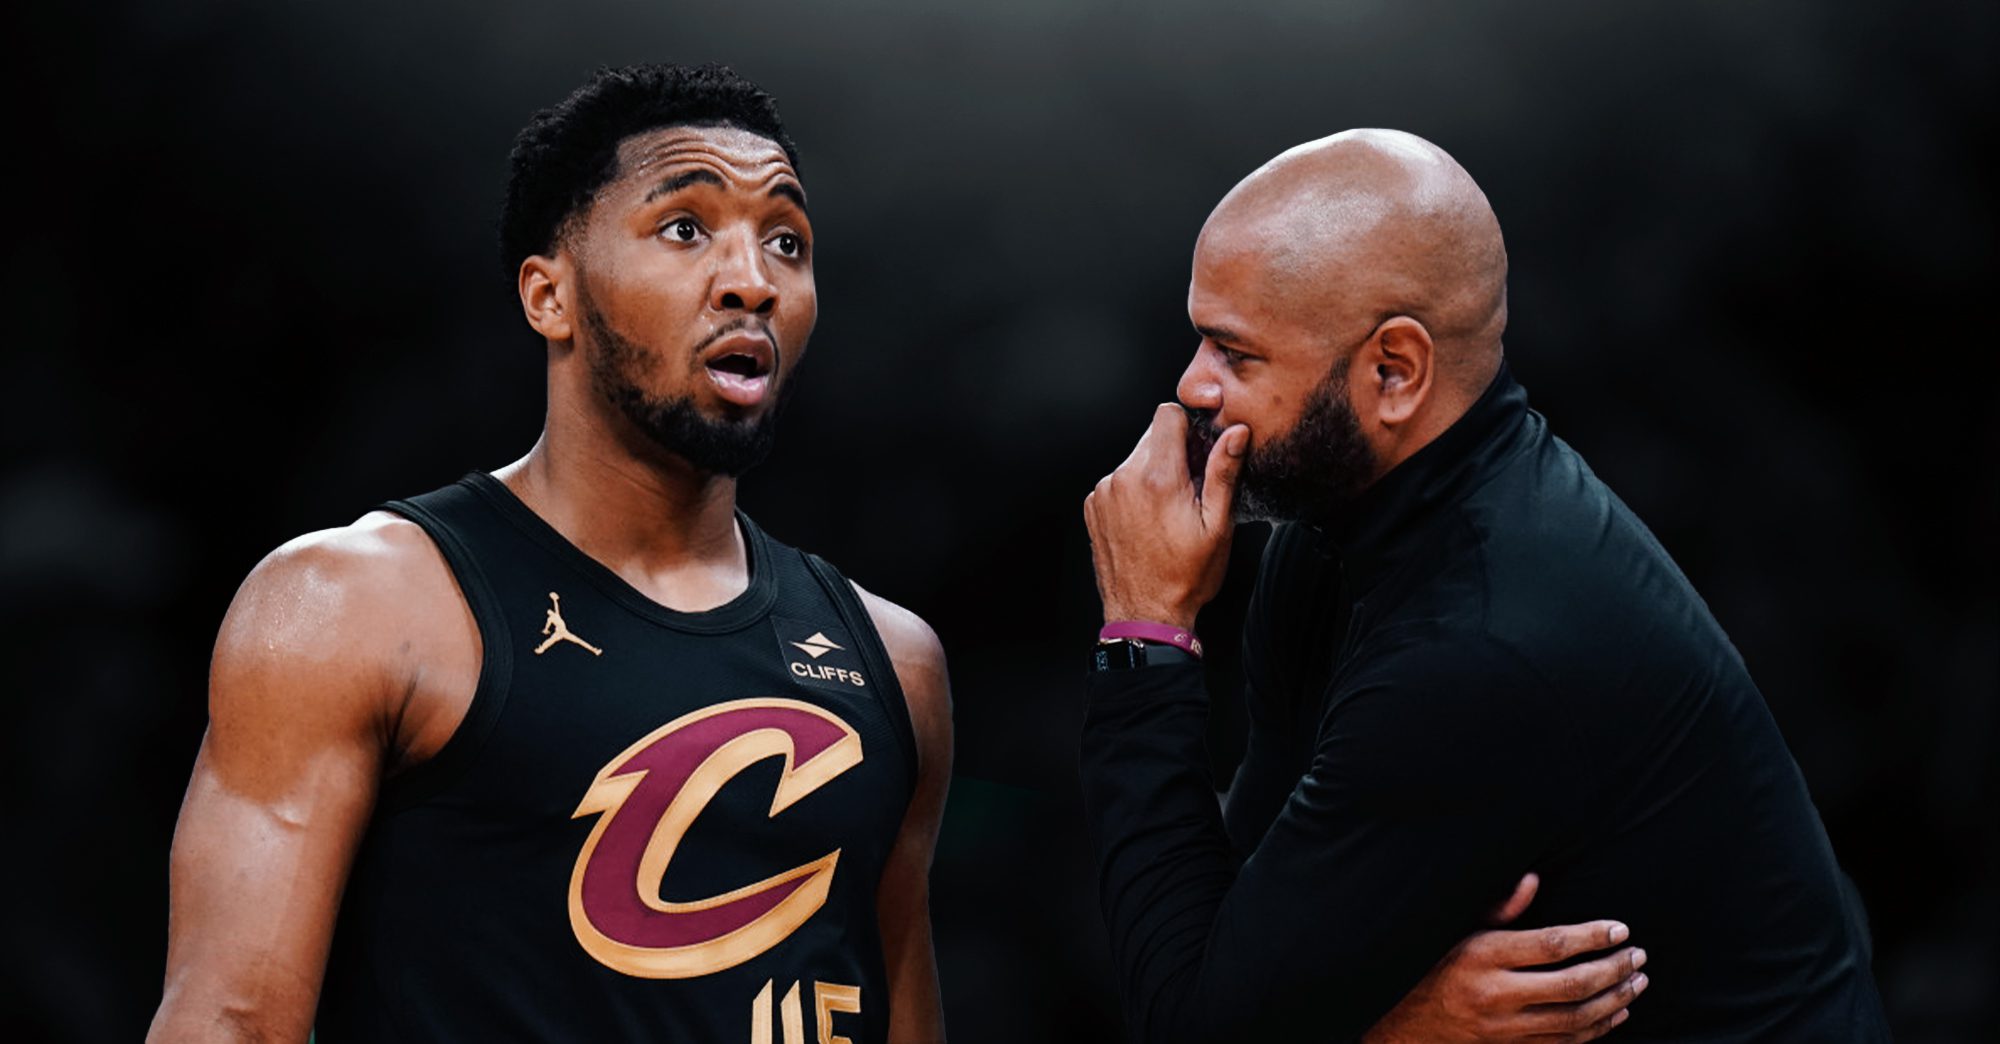 Cavs Coach Lost Locker Room Well Before Playoffs: Report